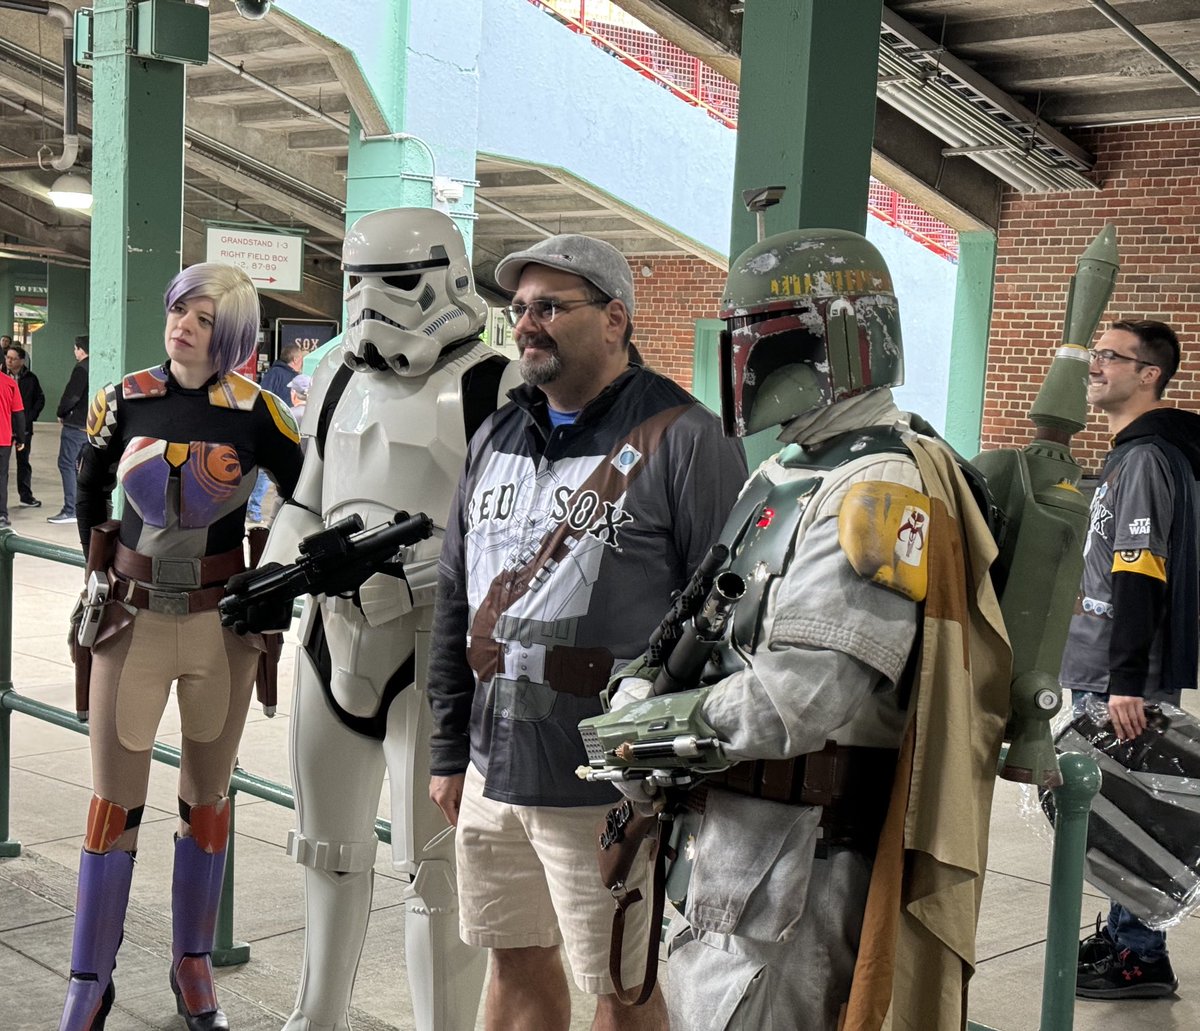 I have a bad feeling about this. #StarWarsNight #Fenway